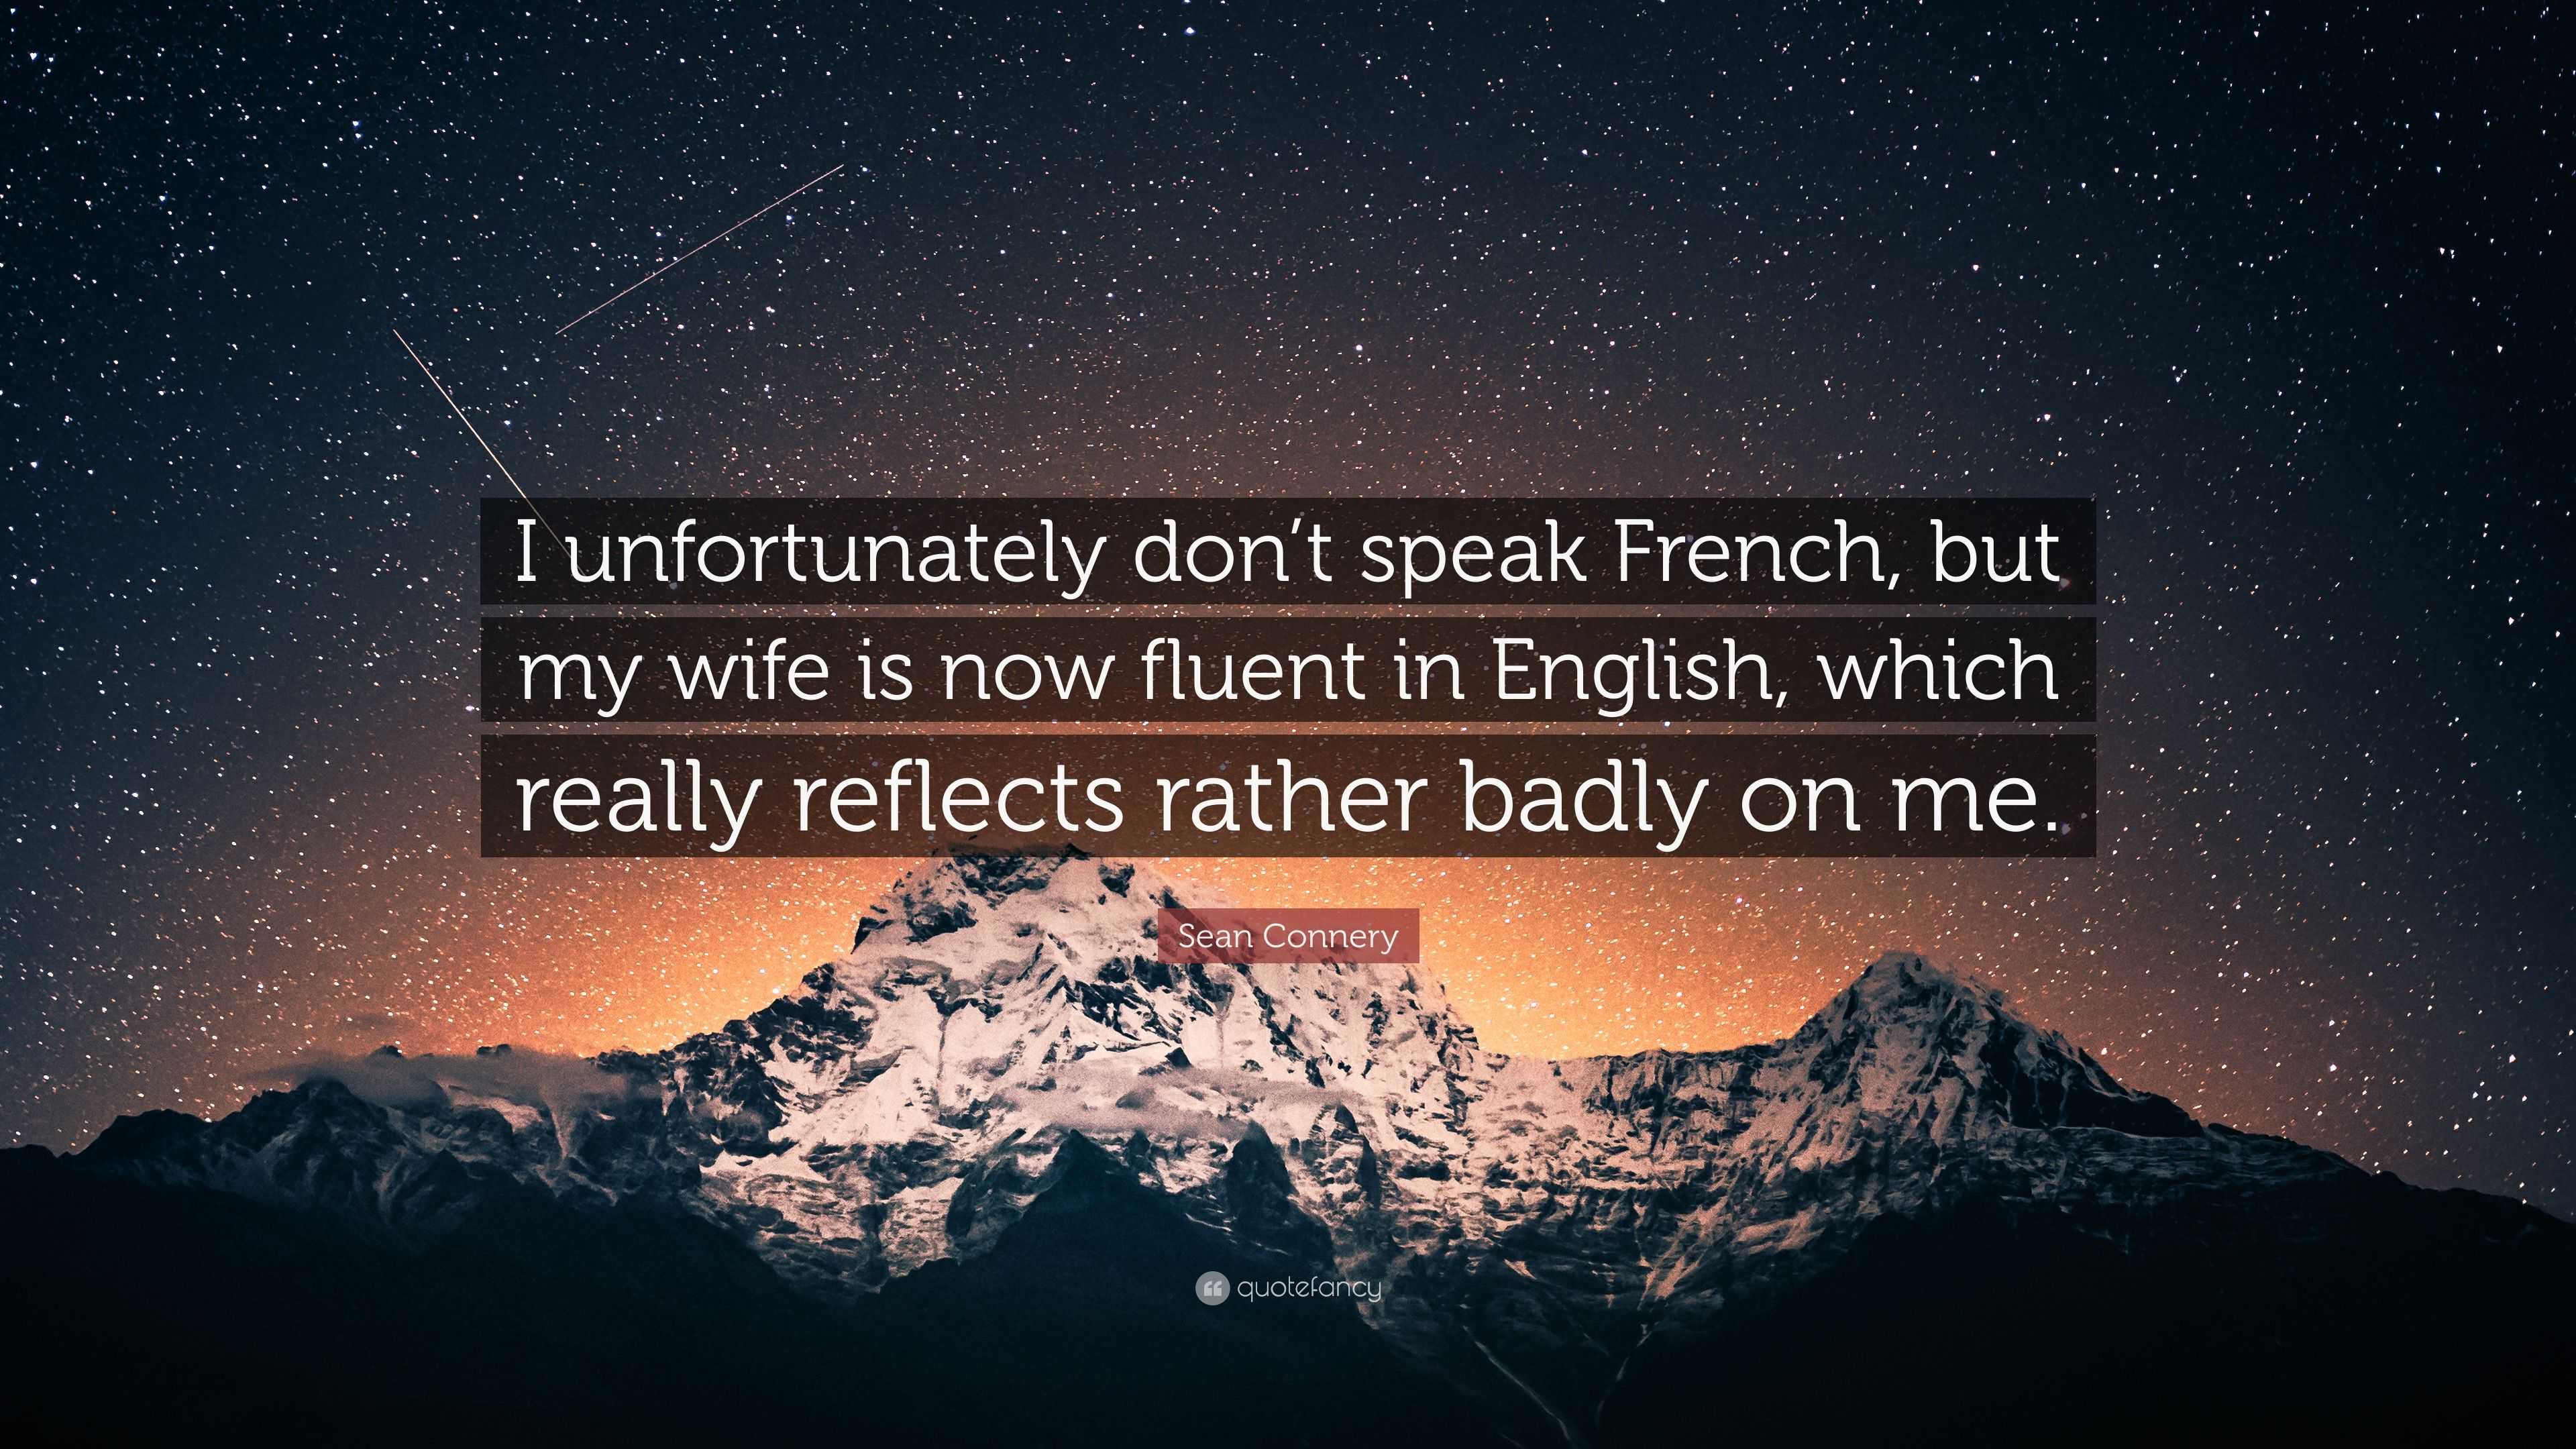 Sean Connery Quote: “I unfortunately don’t speak French, but my wife is ...